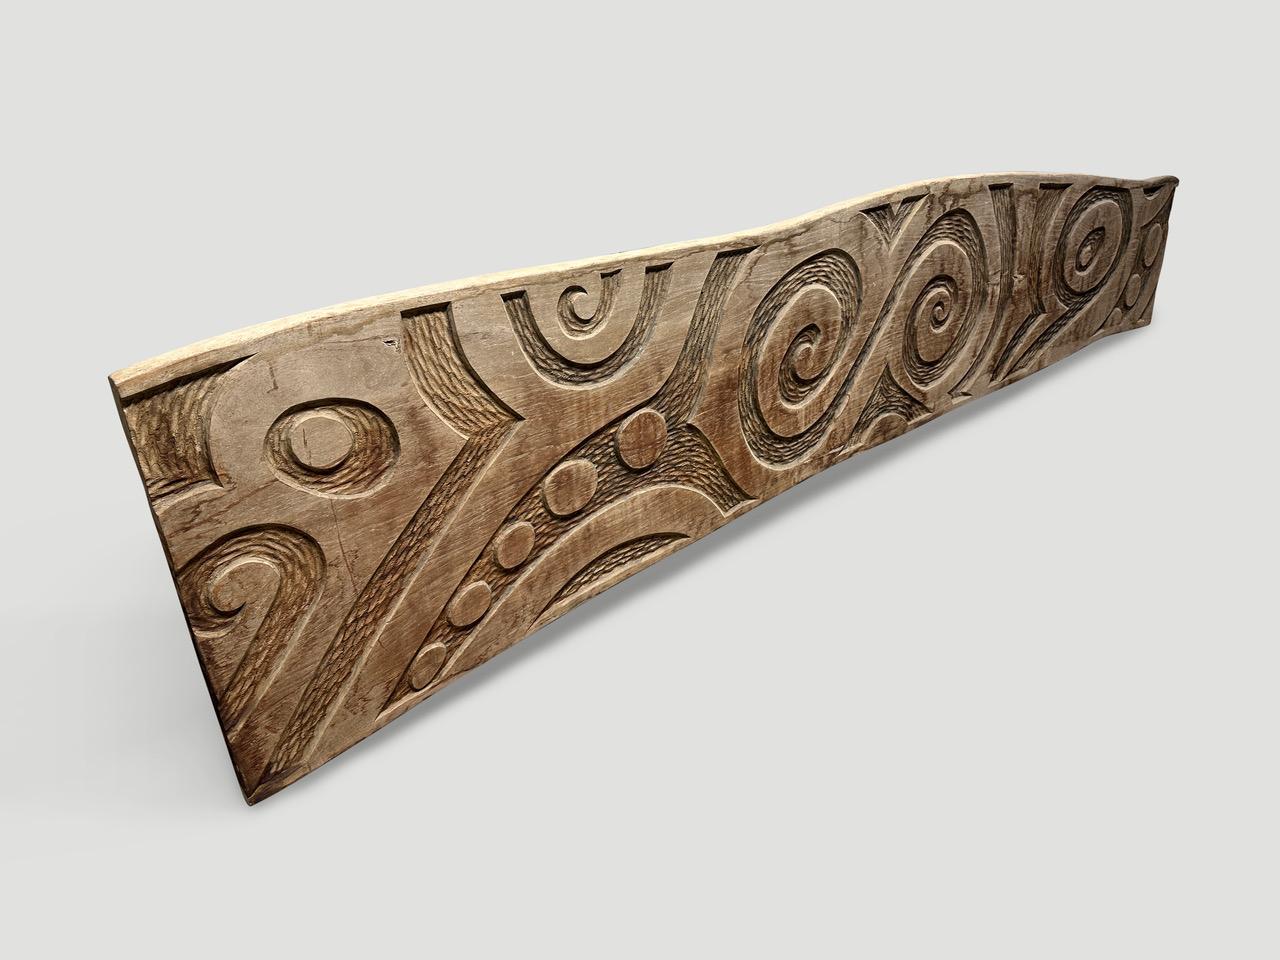 We added an abstract carving to this impressive ancient teak wood panel. Fabulous as a head board, art piece or architectural element. A collaboration with the old and the new. Full dimensions ; 118